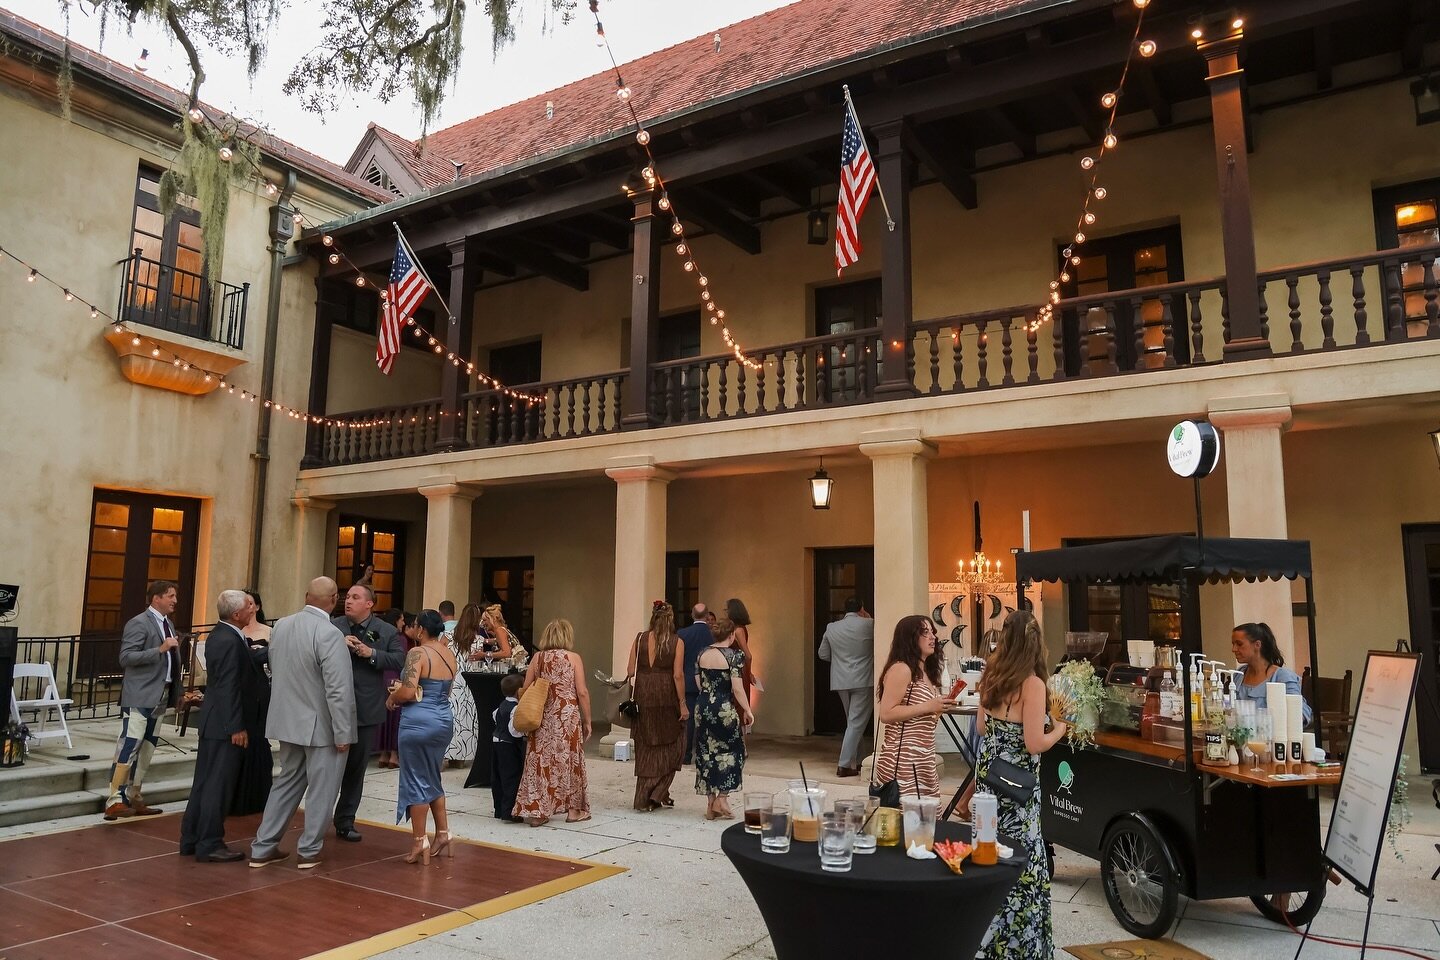 Looking forward to warm summer evenings just like this very special wedding in St.Augustine ❣️☕️